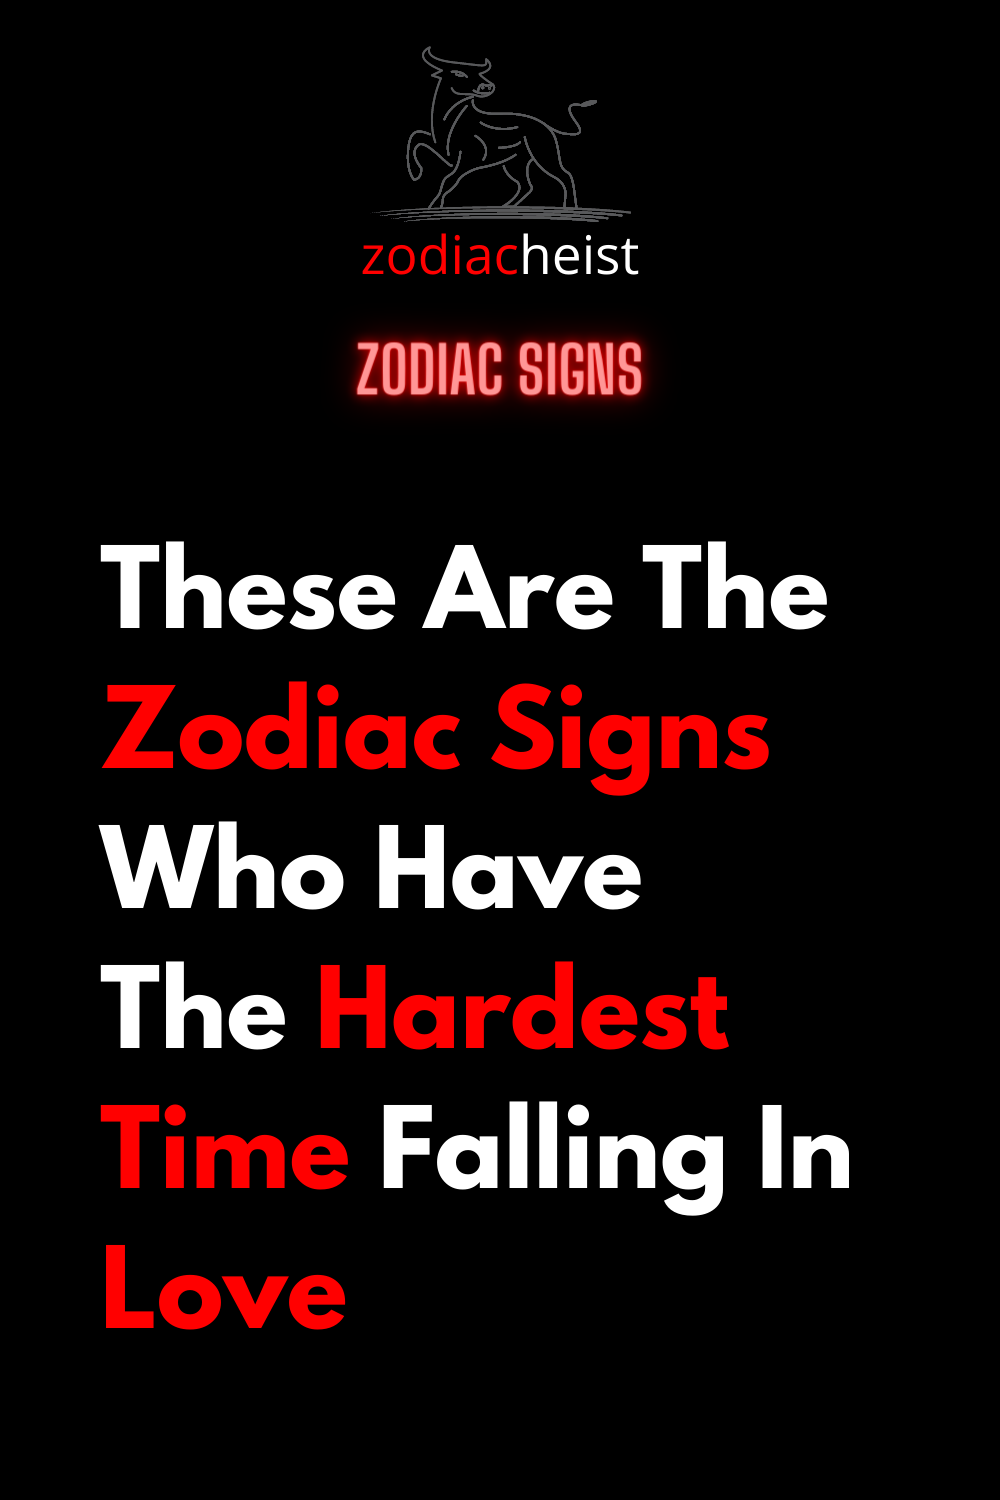 These Are The Zodiac Signs Who Have The Hardest Time Falling In Love